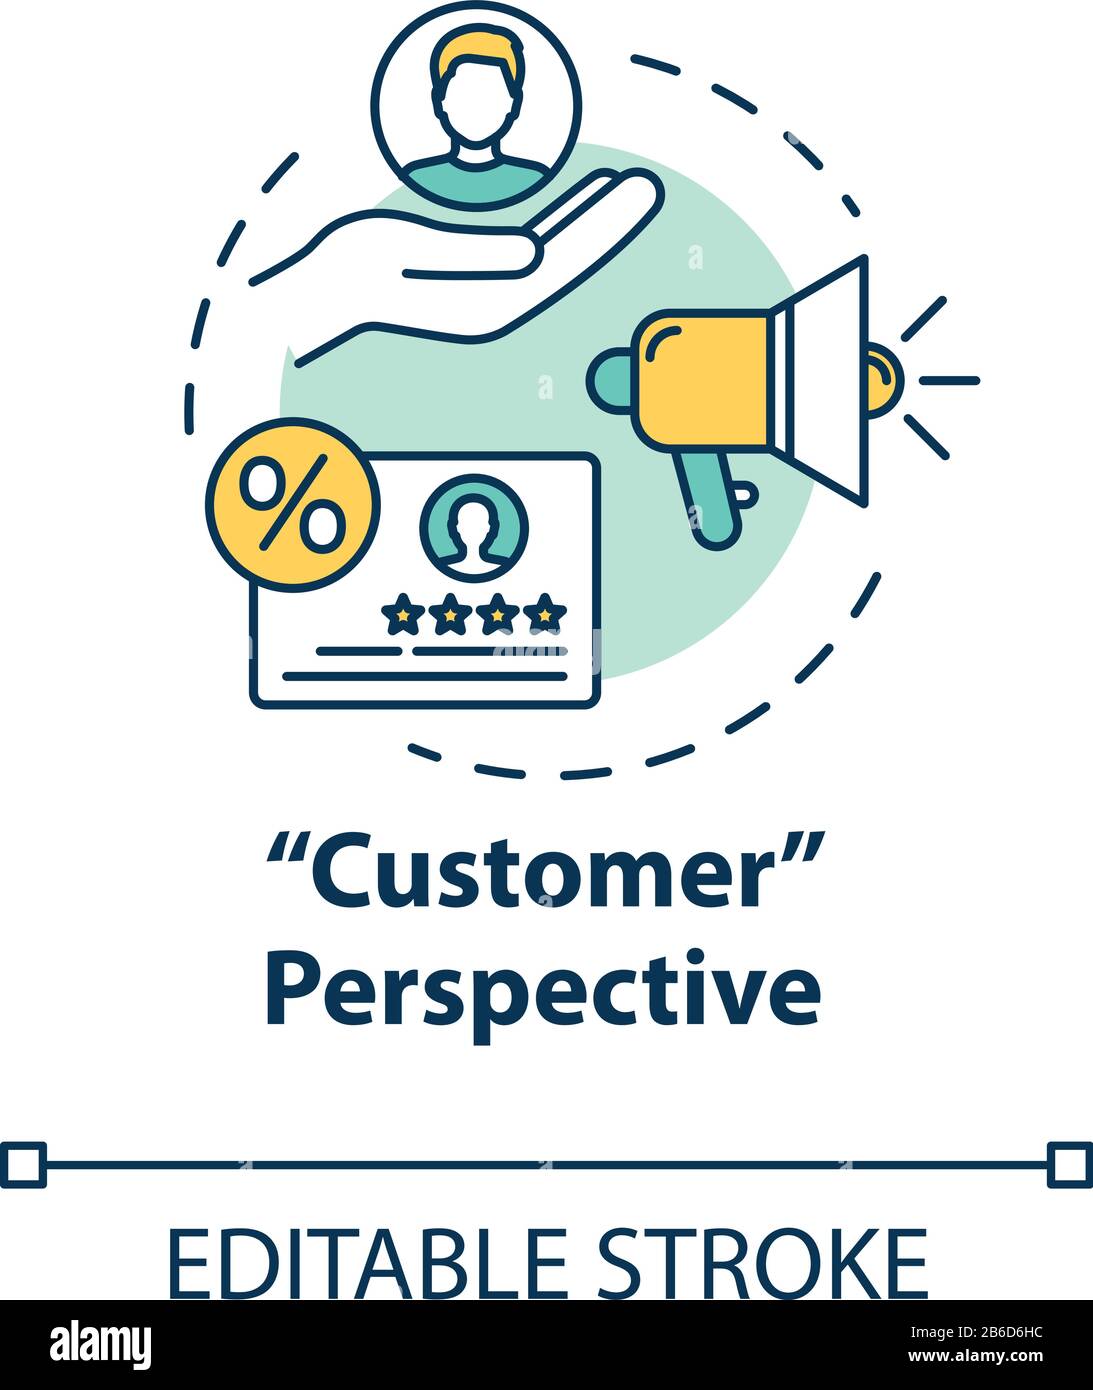 Customer perspective concept icon. Potential clients. Building audience. Sales prospect. Market share growth idea thin line illustration. Vector Stock Vector